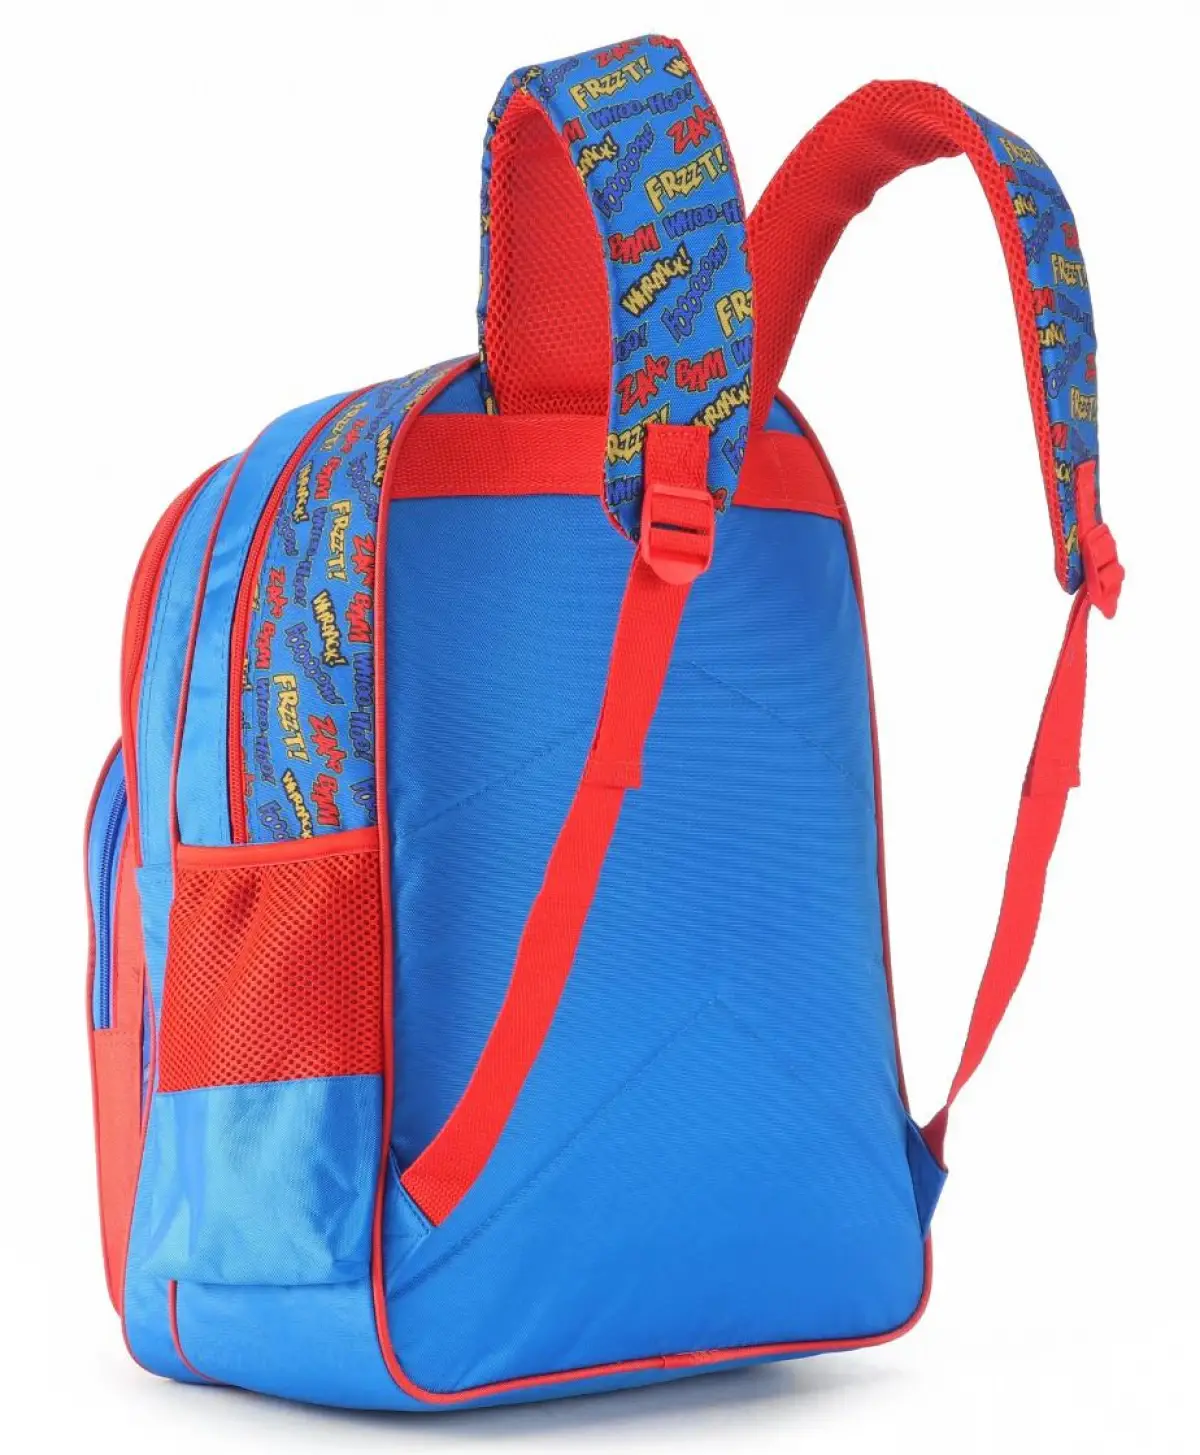 Striders 14 inches Spiderman School Bag Inspire Learning with Spider-Man's Style Multicolor For Kids Ages 3Y+